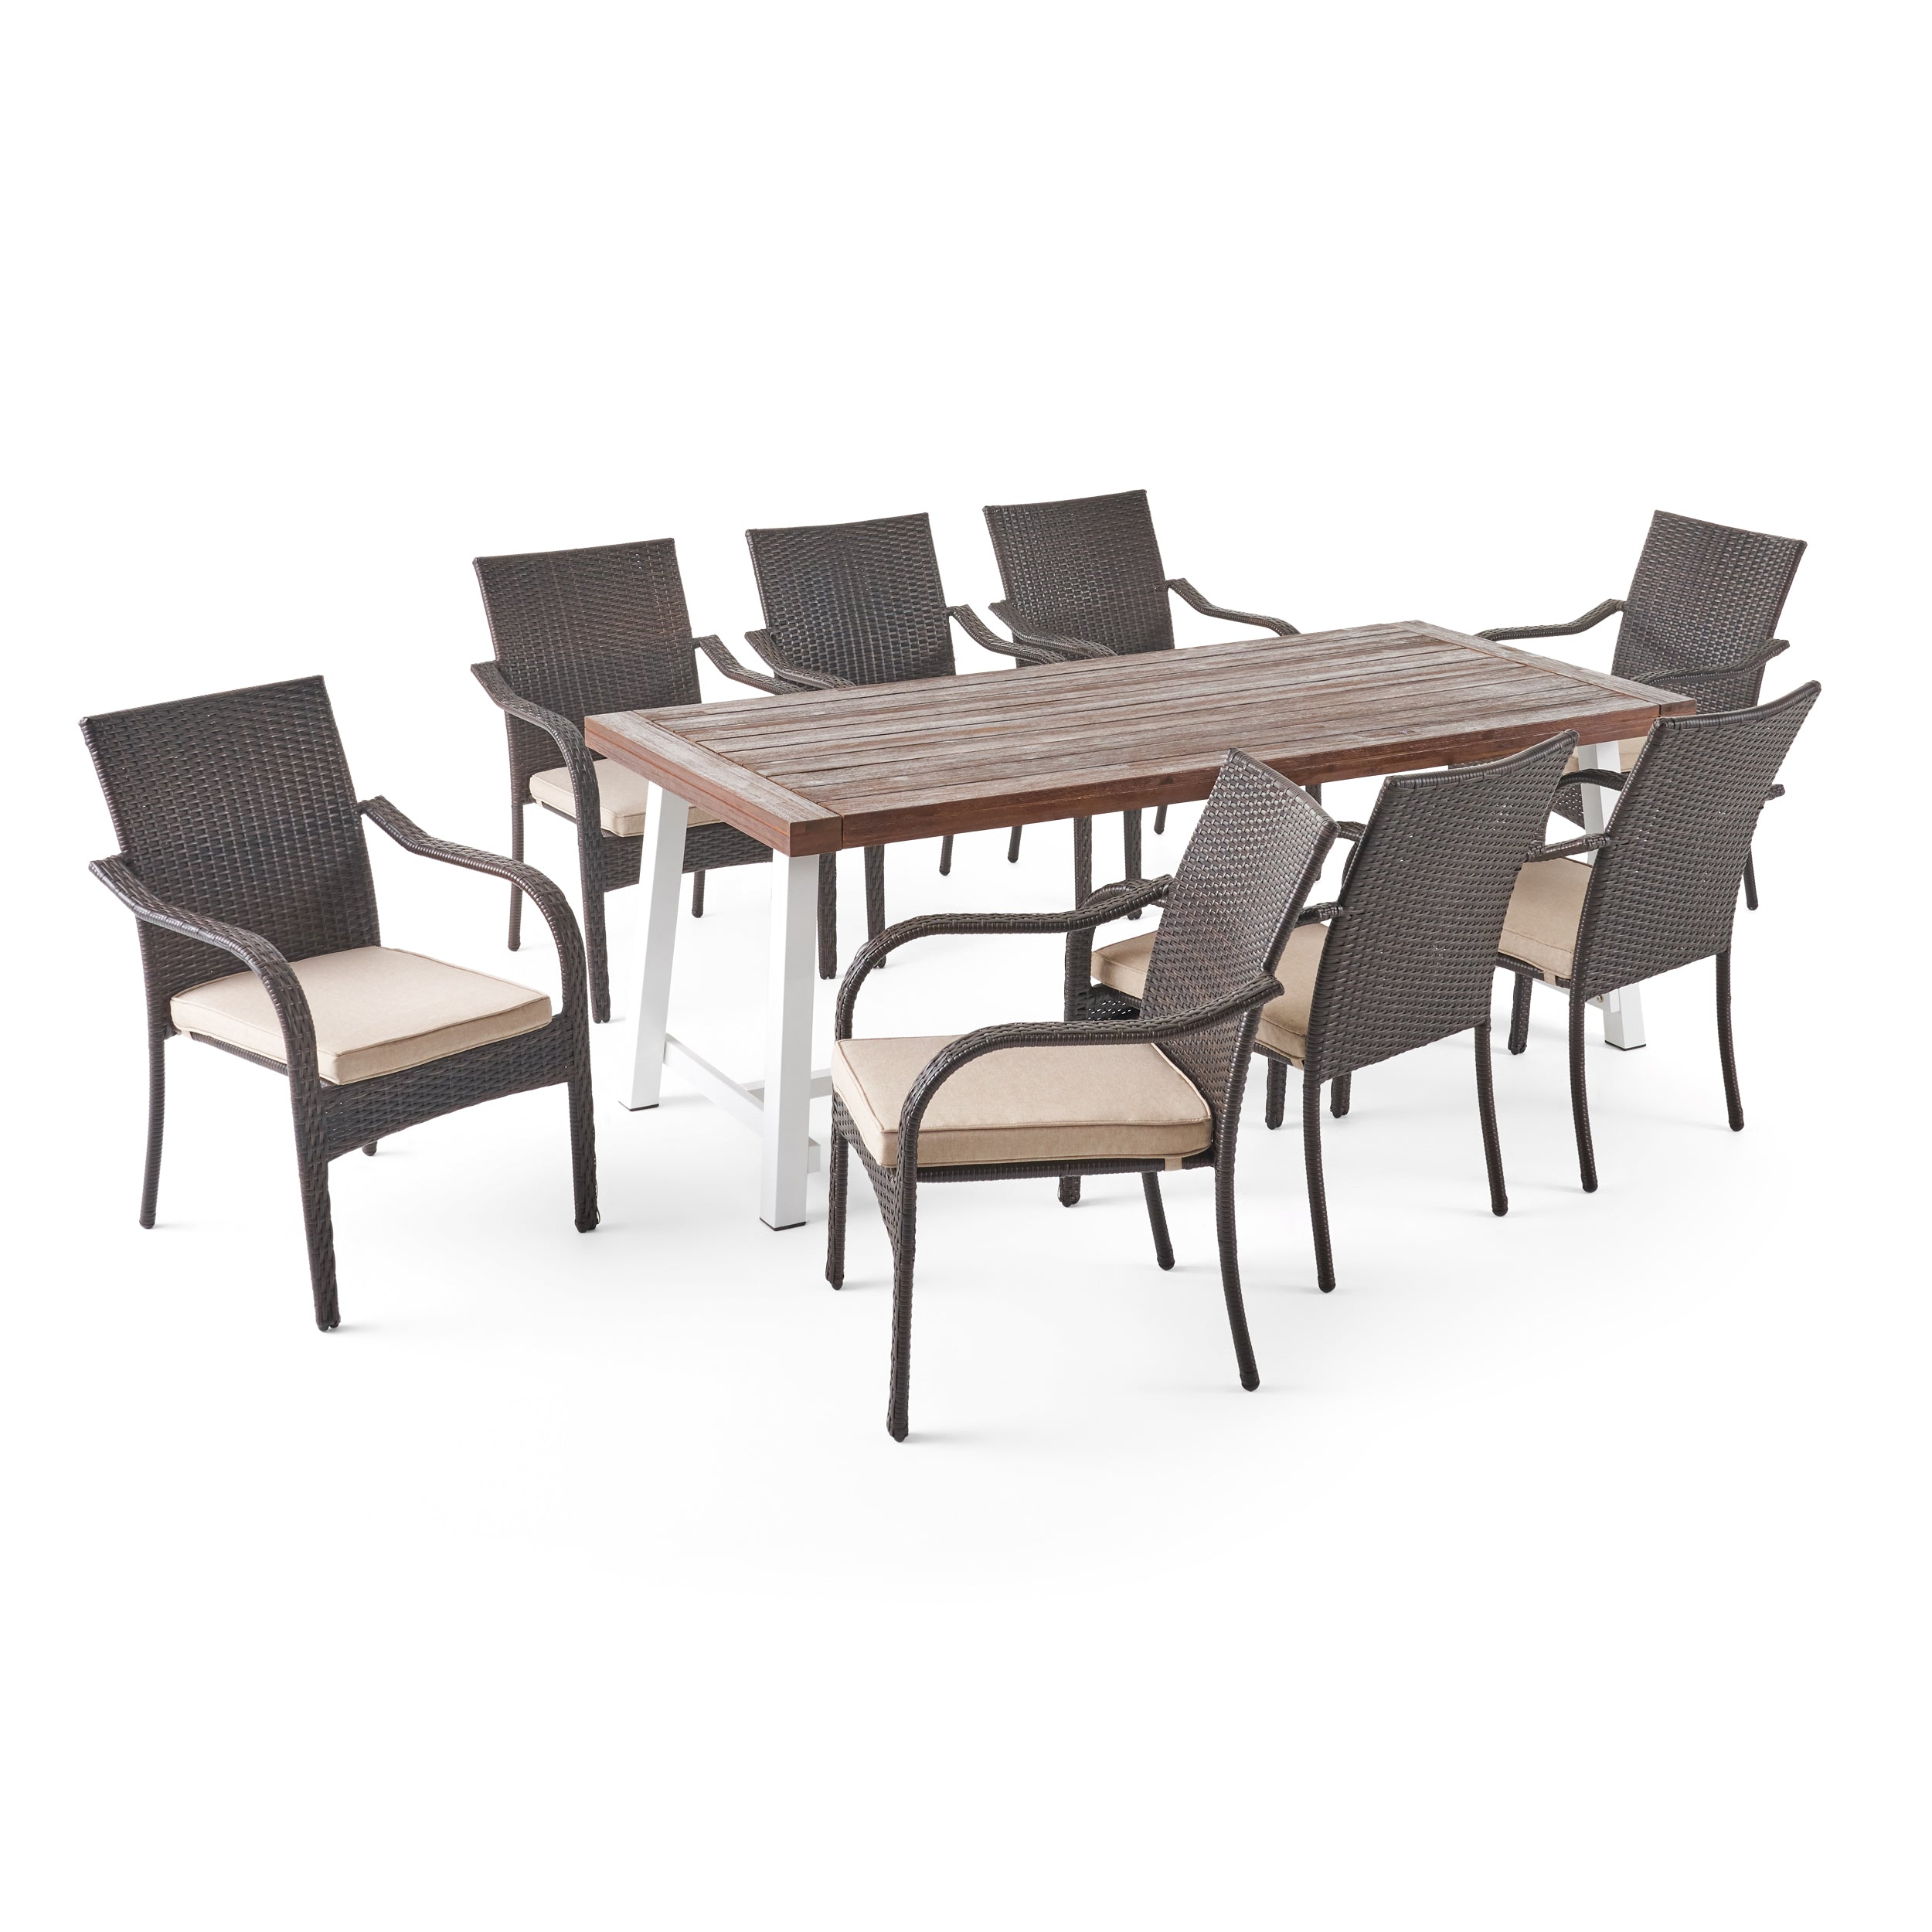 Addilynn Outdoor Wood and Wicker 8 Seater Dining Set Default Title